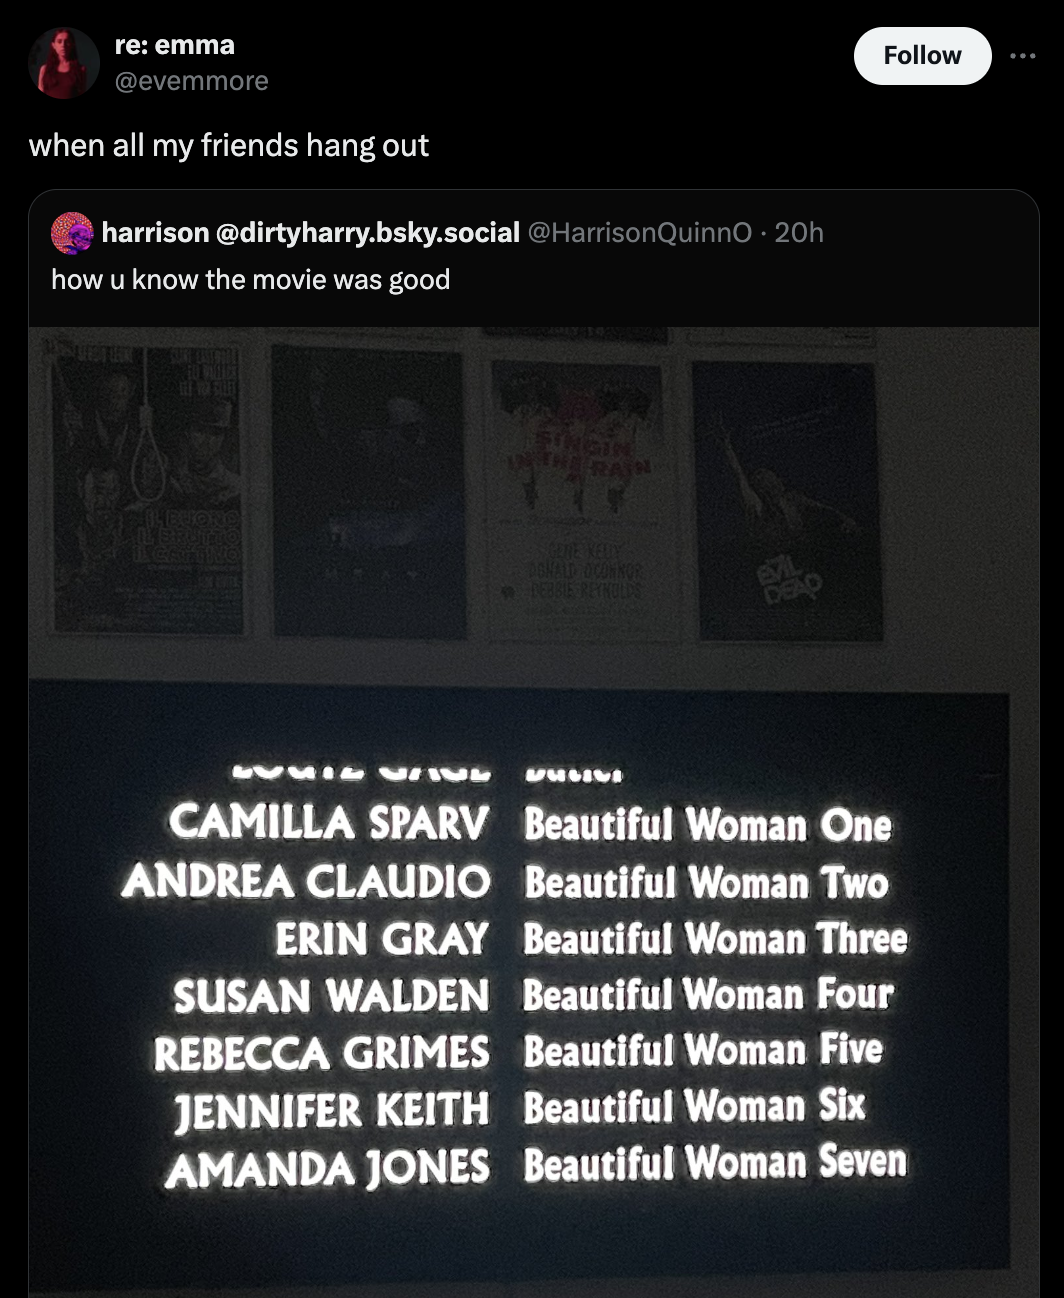 screenshot - re emma when all my friends hang out harrison .bsky.social 20h how u know the movie was good 2333325 333333 Camilla Sparv Beautiful Woman One Andrea Claudio Beautiful Woman Two Erin Gray Beautiful Woman Three Susan Walden Beautiful Woman Four